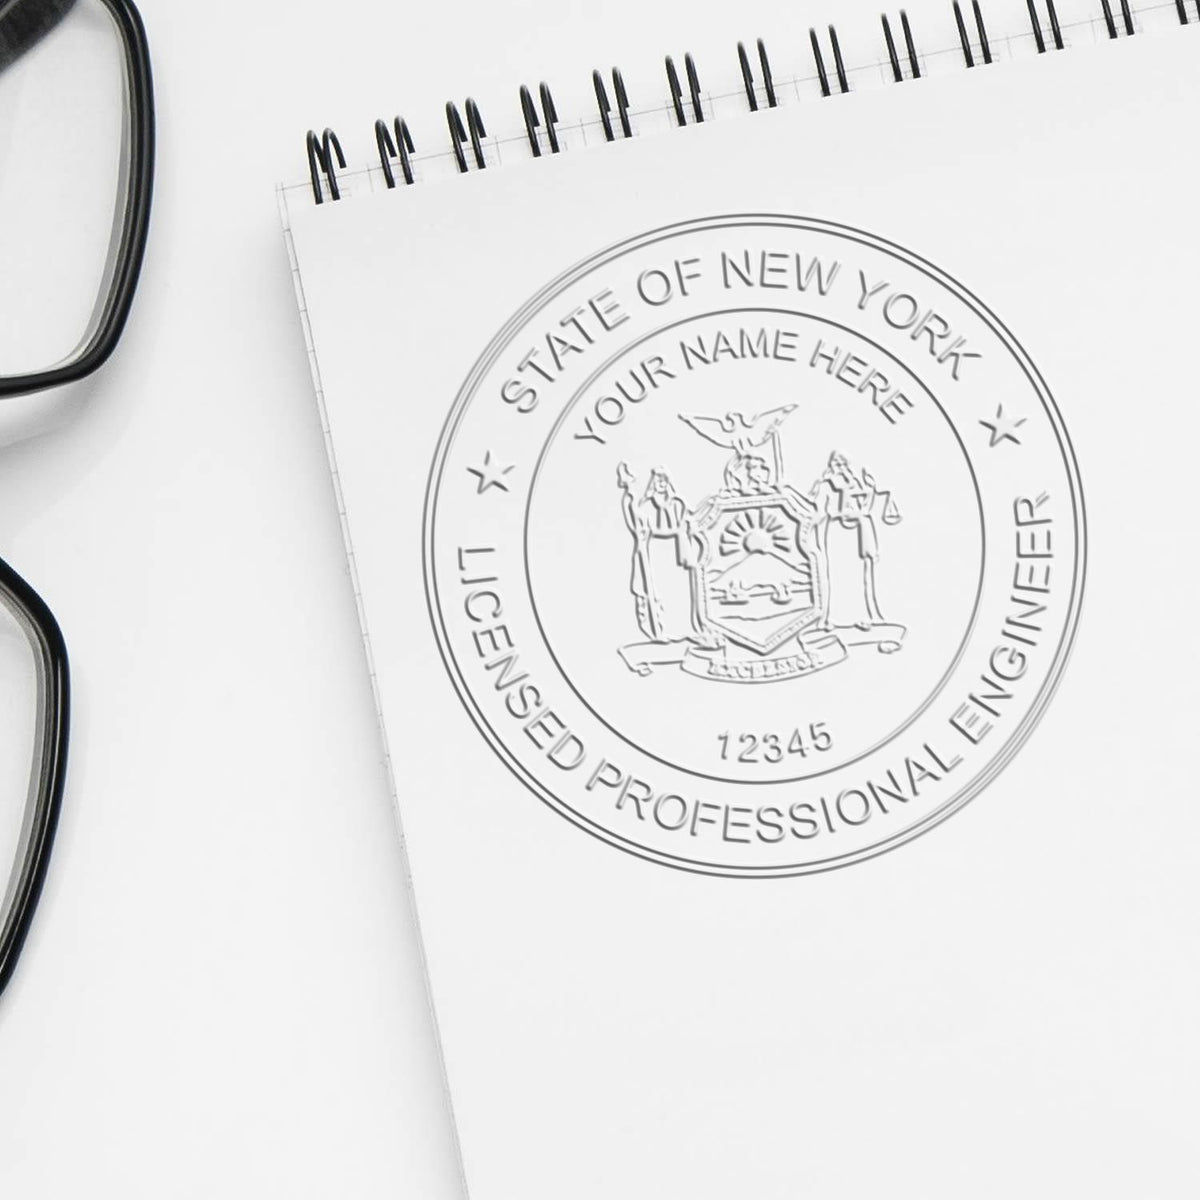 A photograph of the Long Reach New York PE Seal stamp impression reveals a vivid, professional image of the on paper.